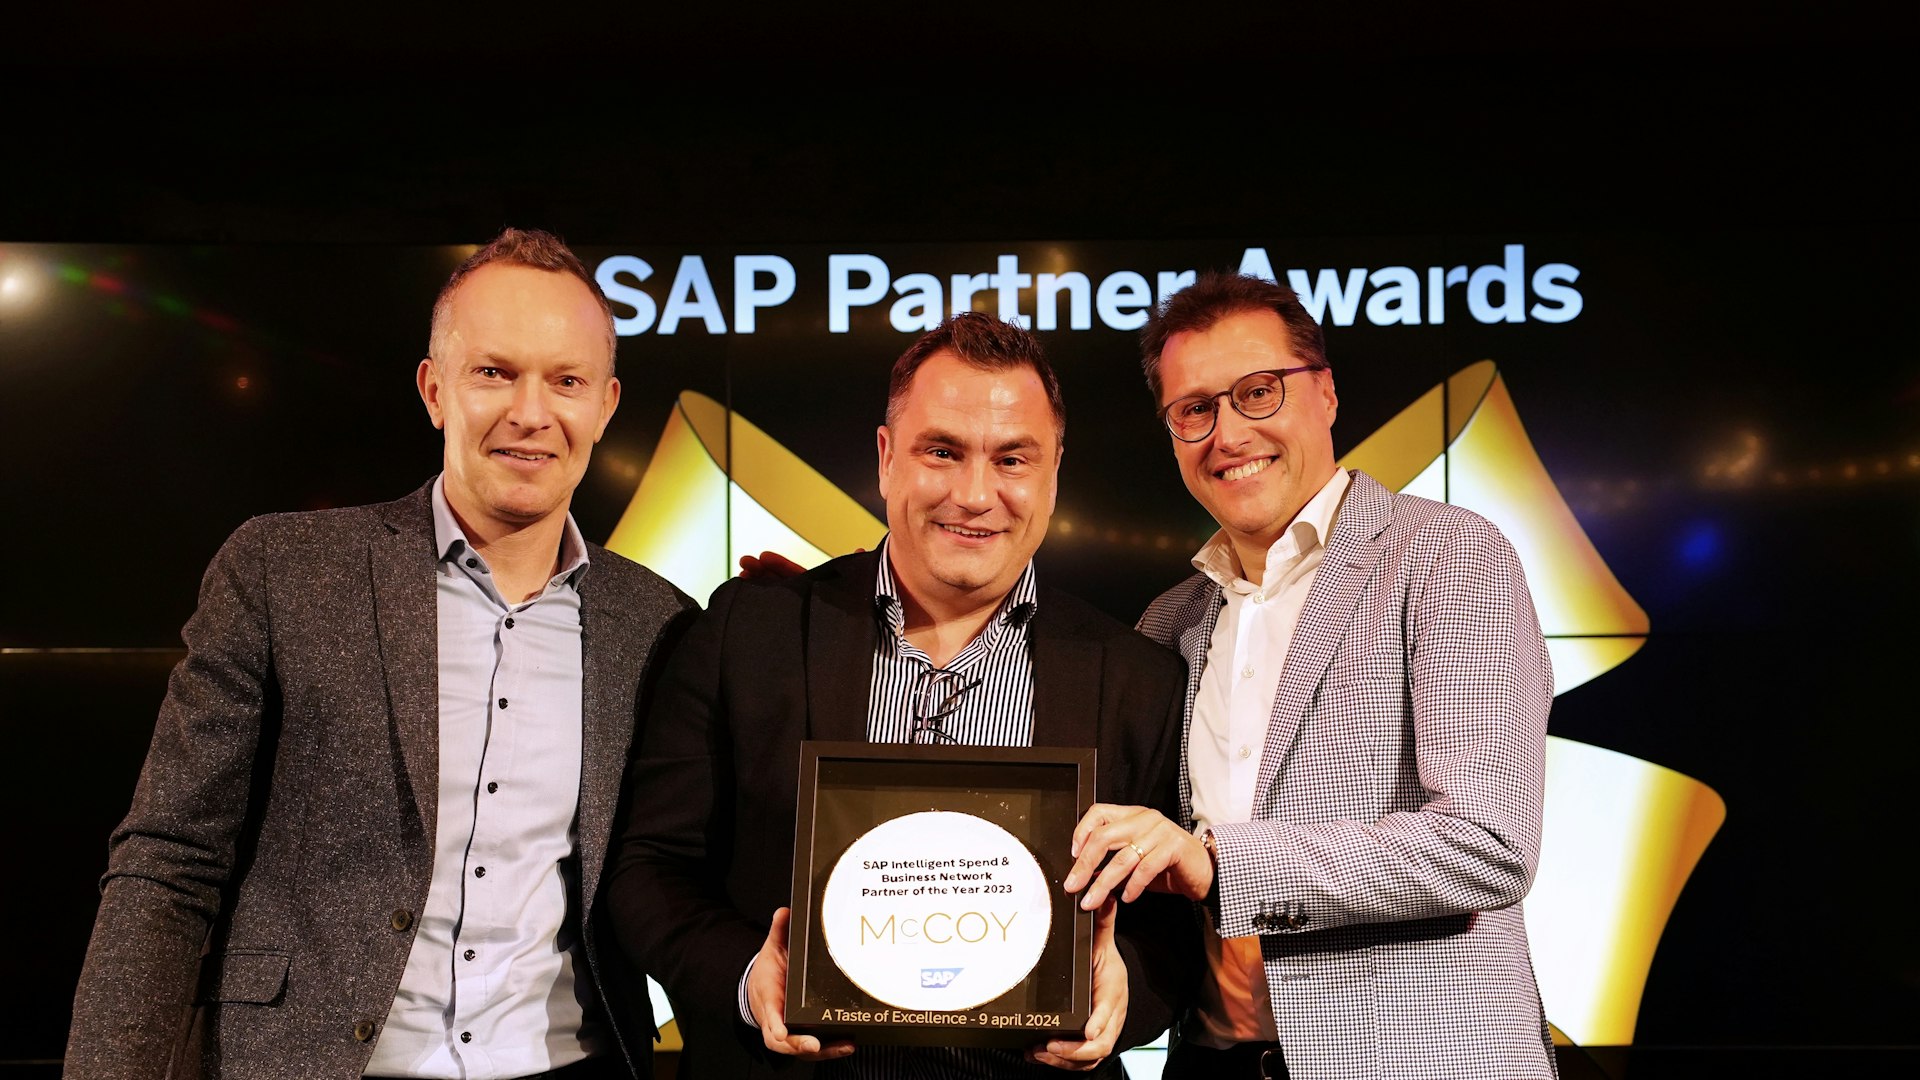 SAP Intelligent Spend Business Network Partner of the Year 2023